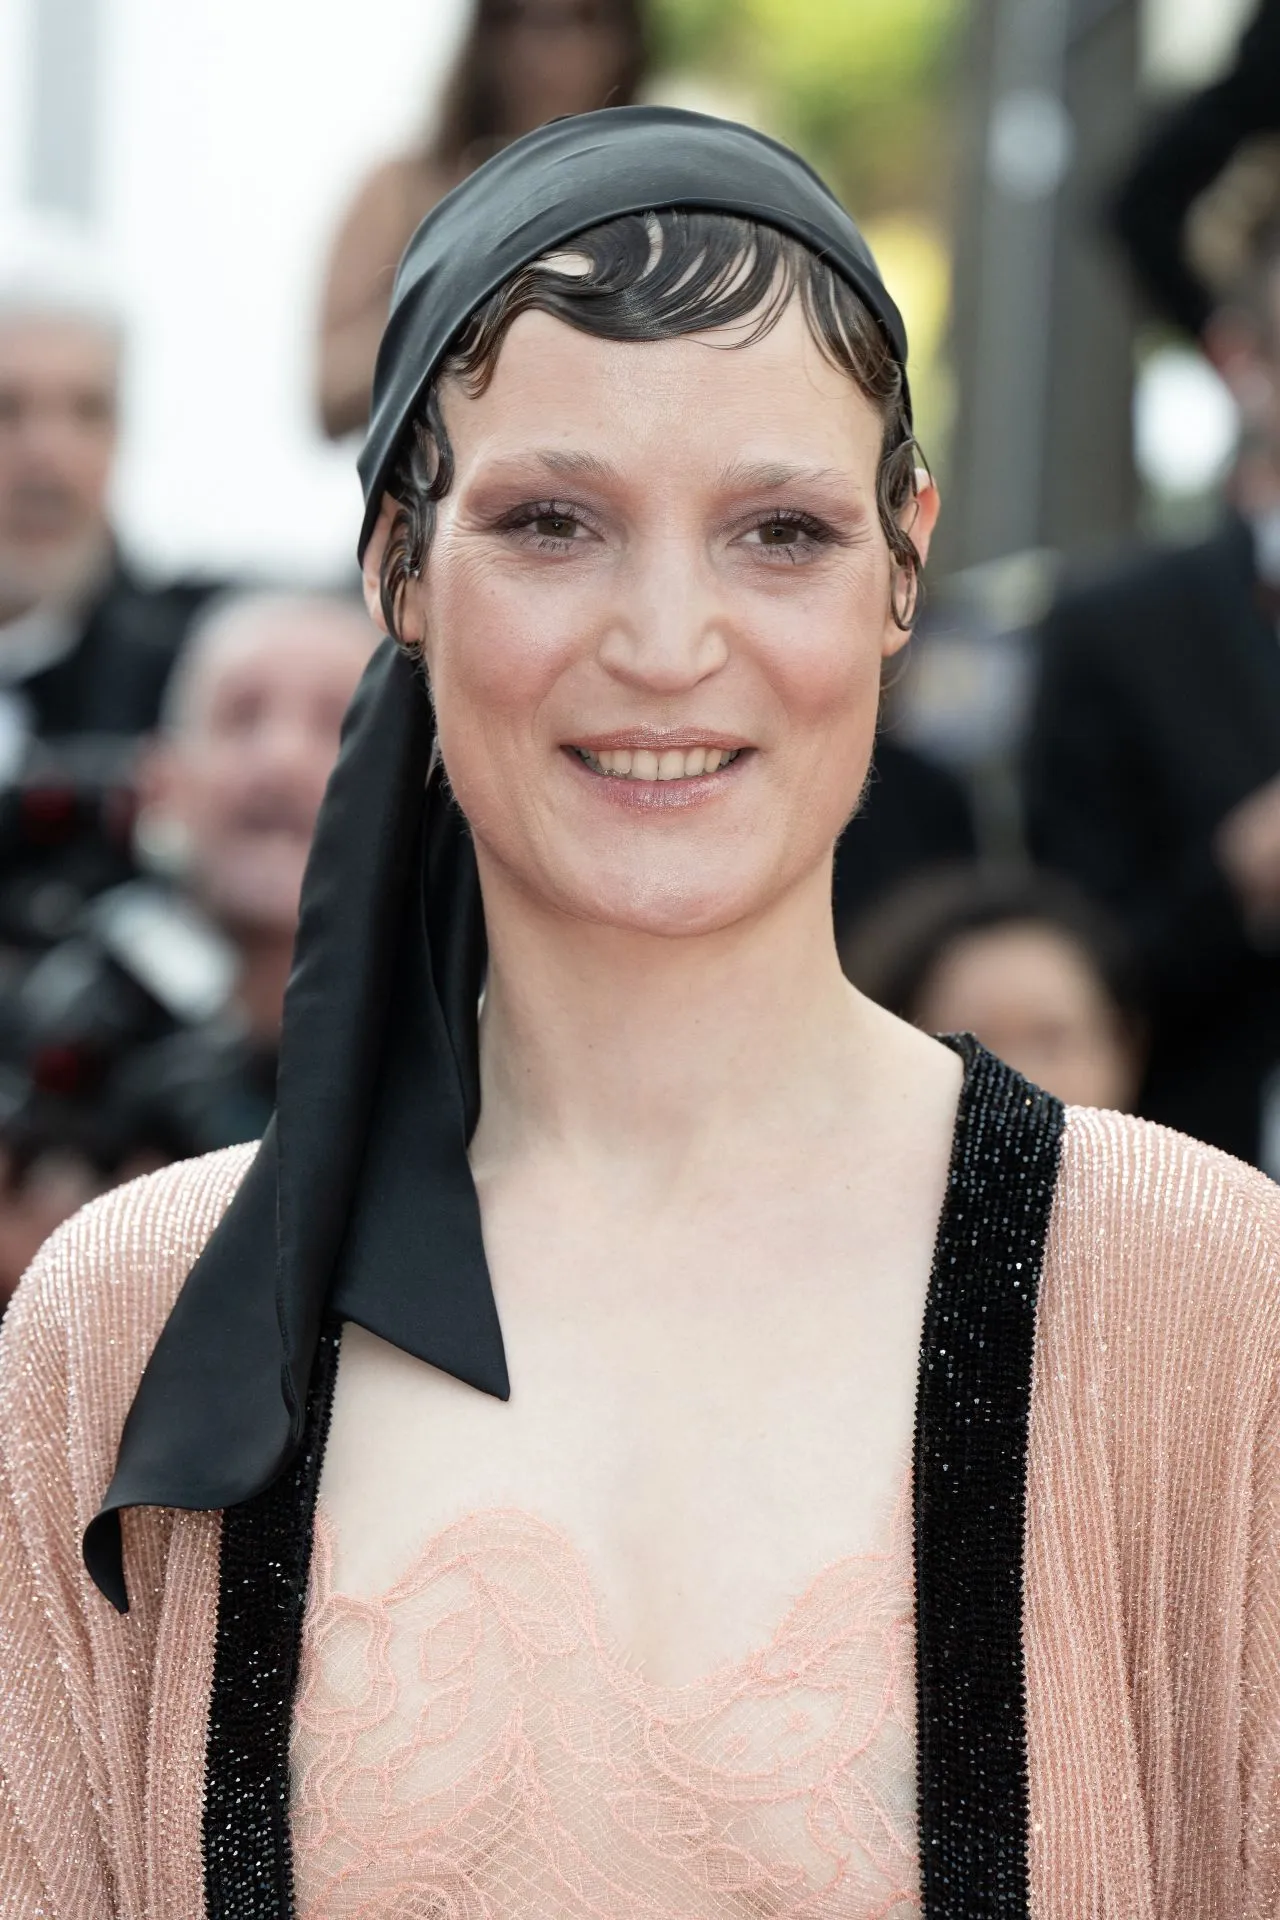 VICKY KRIEPS AT THE MOST PRECIOUS OF CARGOES PREMIERE AT CANNES FILM FESTIVAL